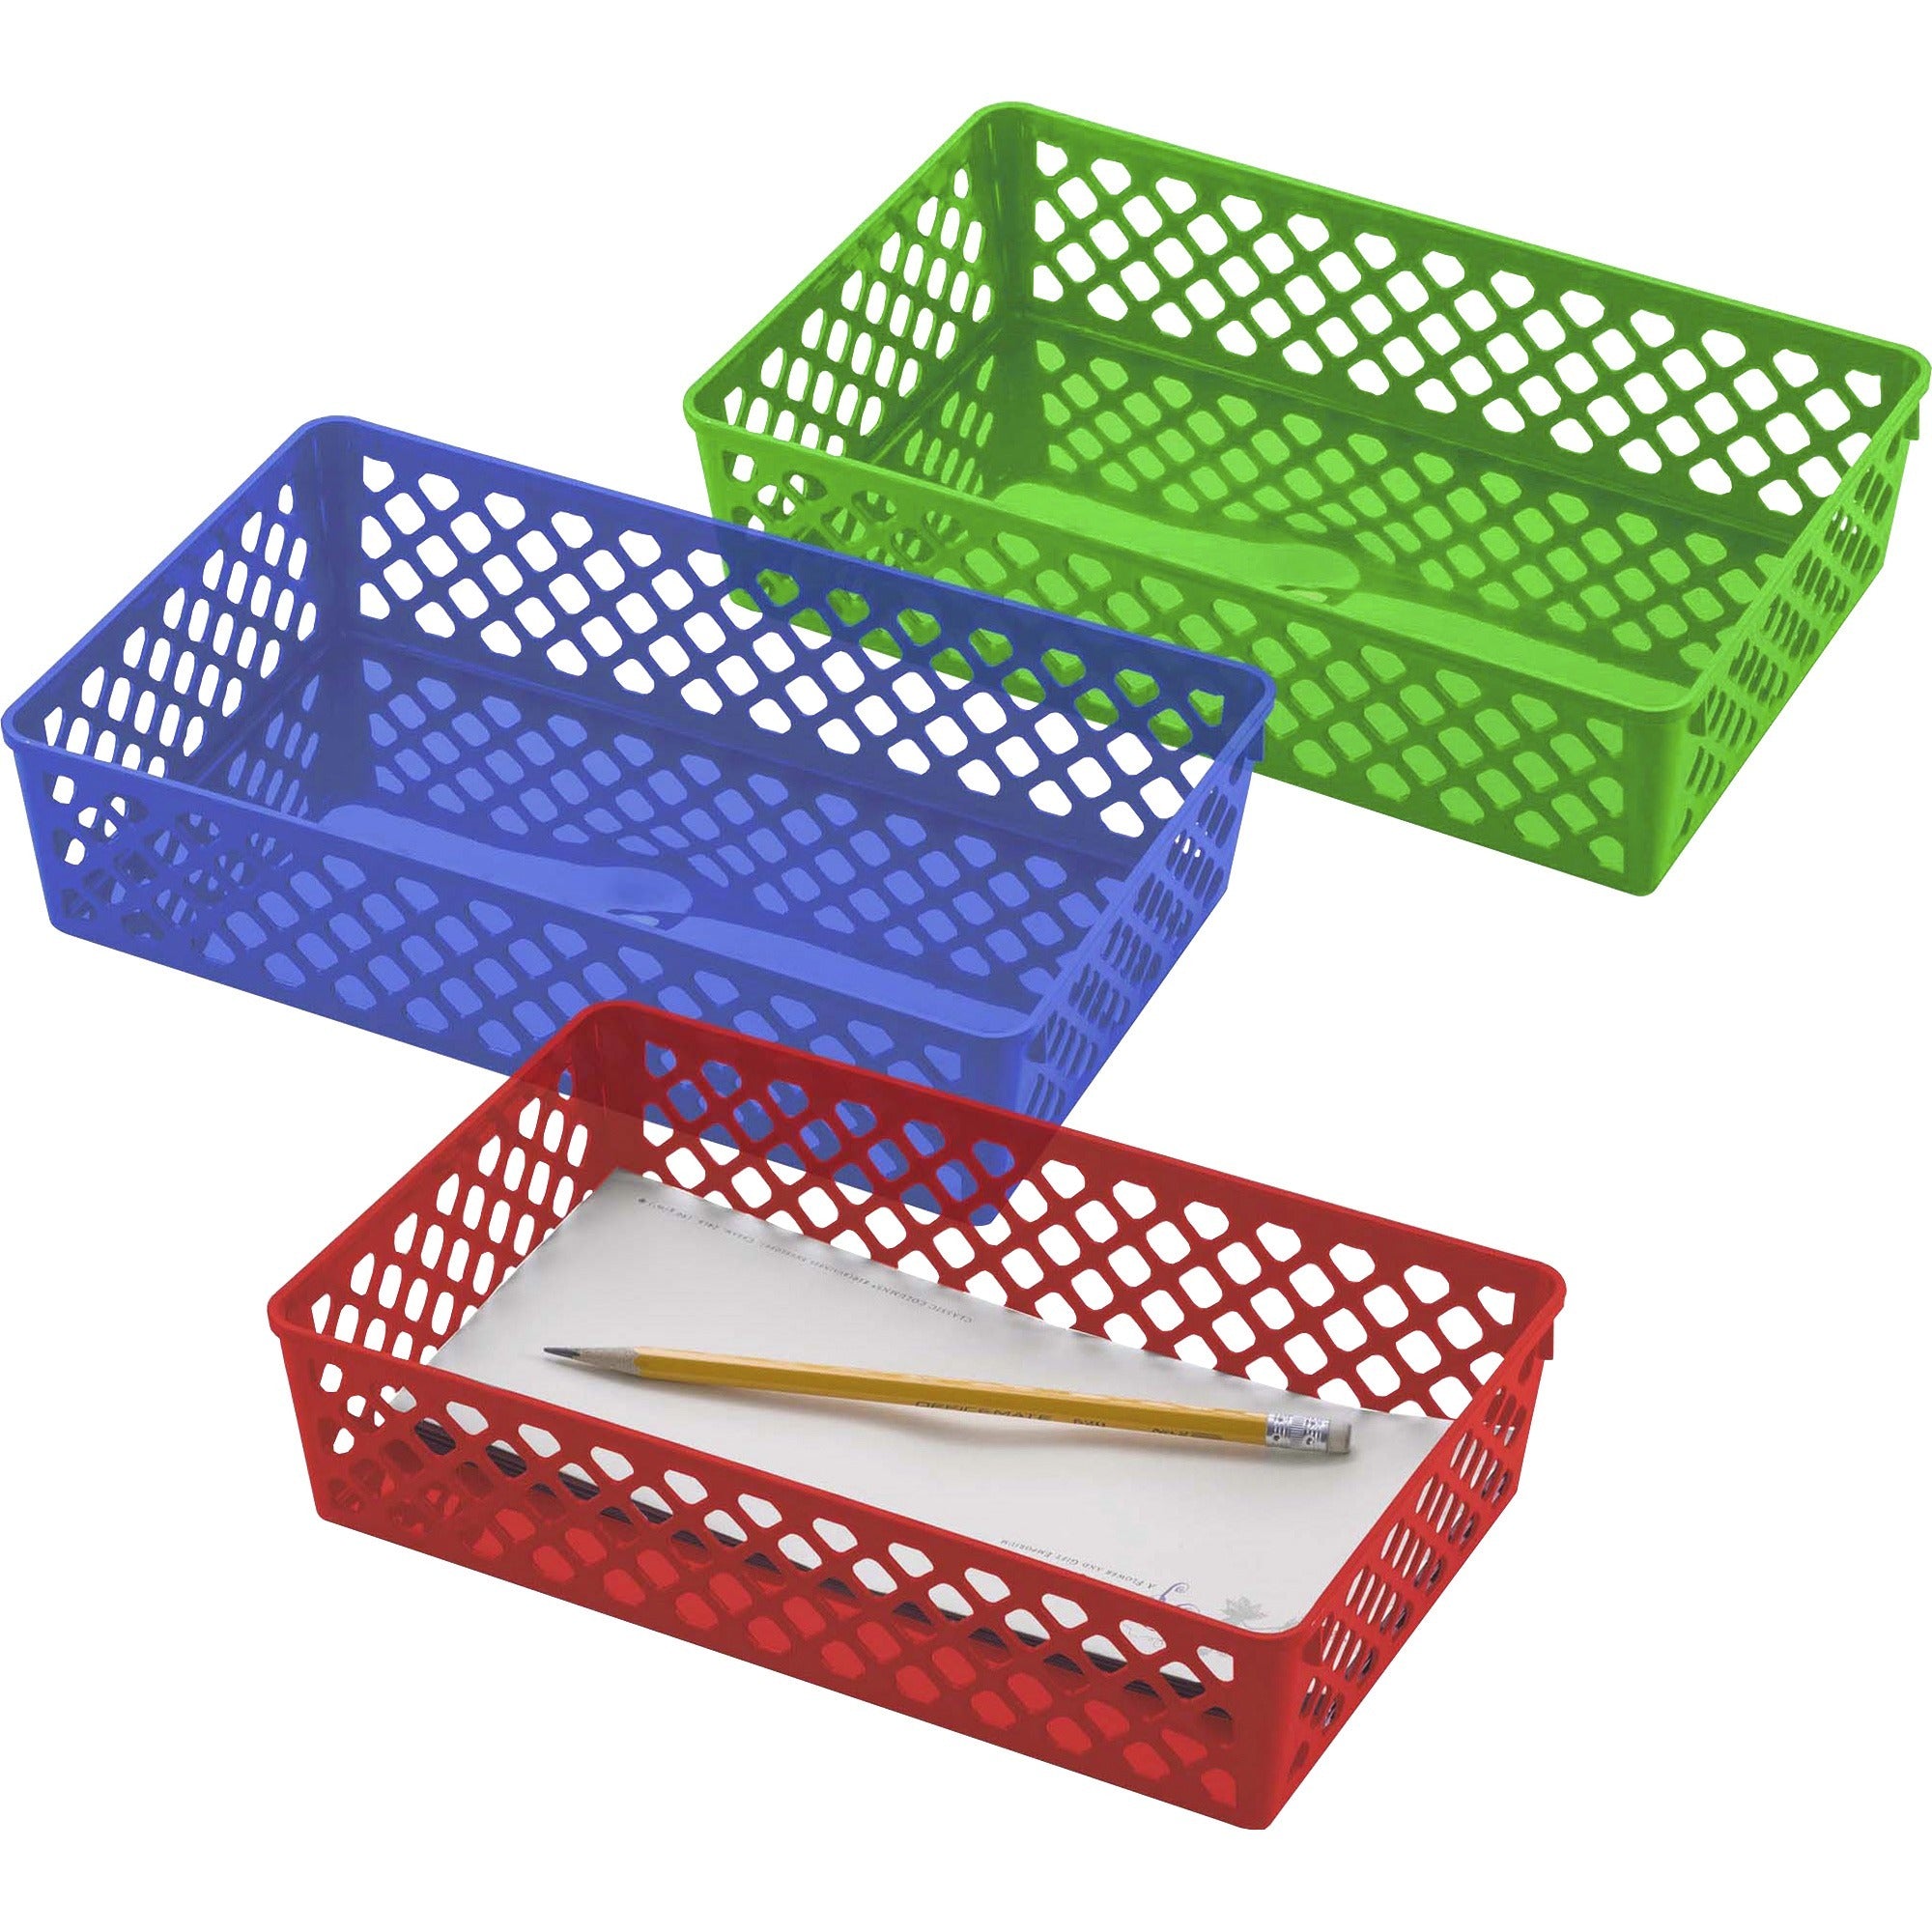 officemate-achieva-large-supply-basket-assorted-colors-3-pk-24-height-x-106-width-x-61-depth-compact-stackable-storage-space-sturdy-heavy-duty-blue-green-red-plastic-3-pack_oic26208 - 1